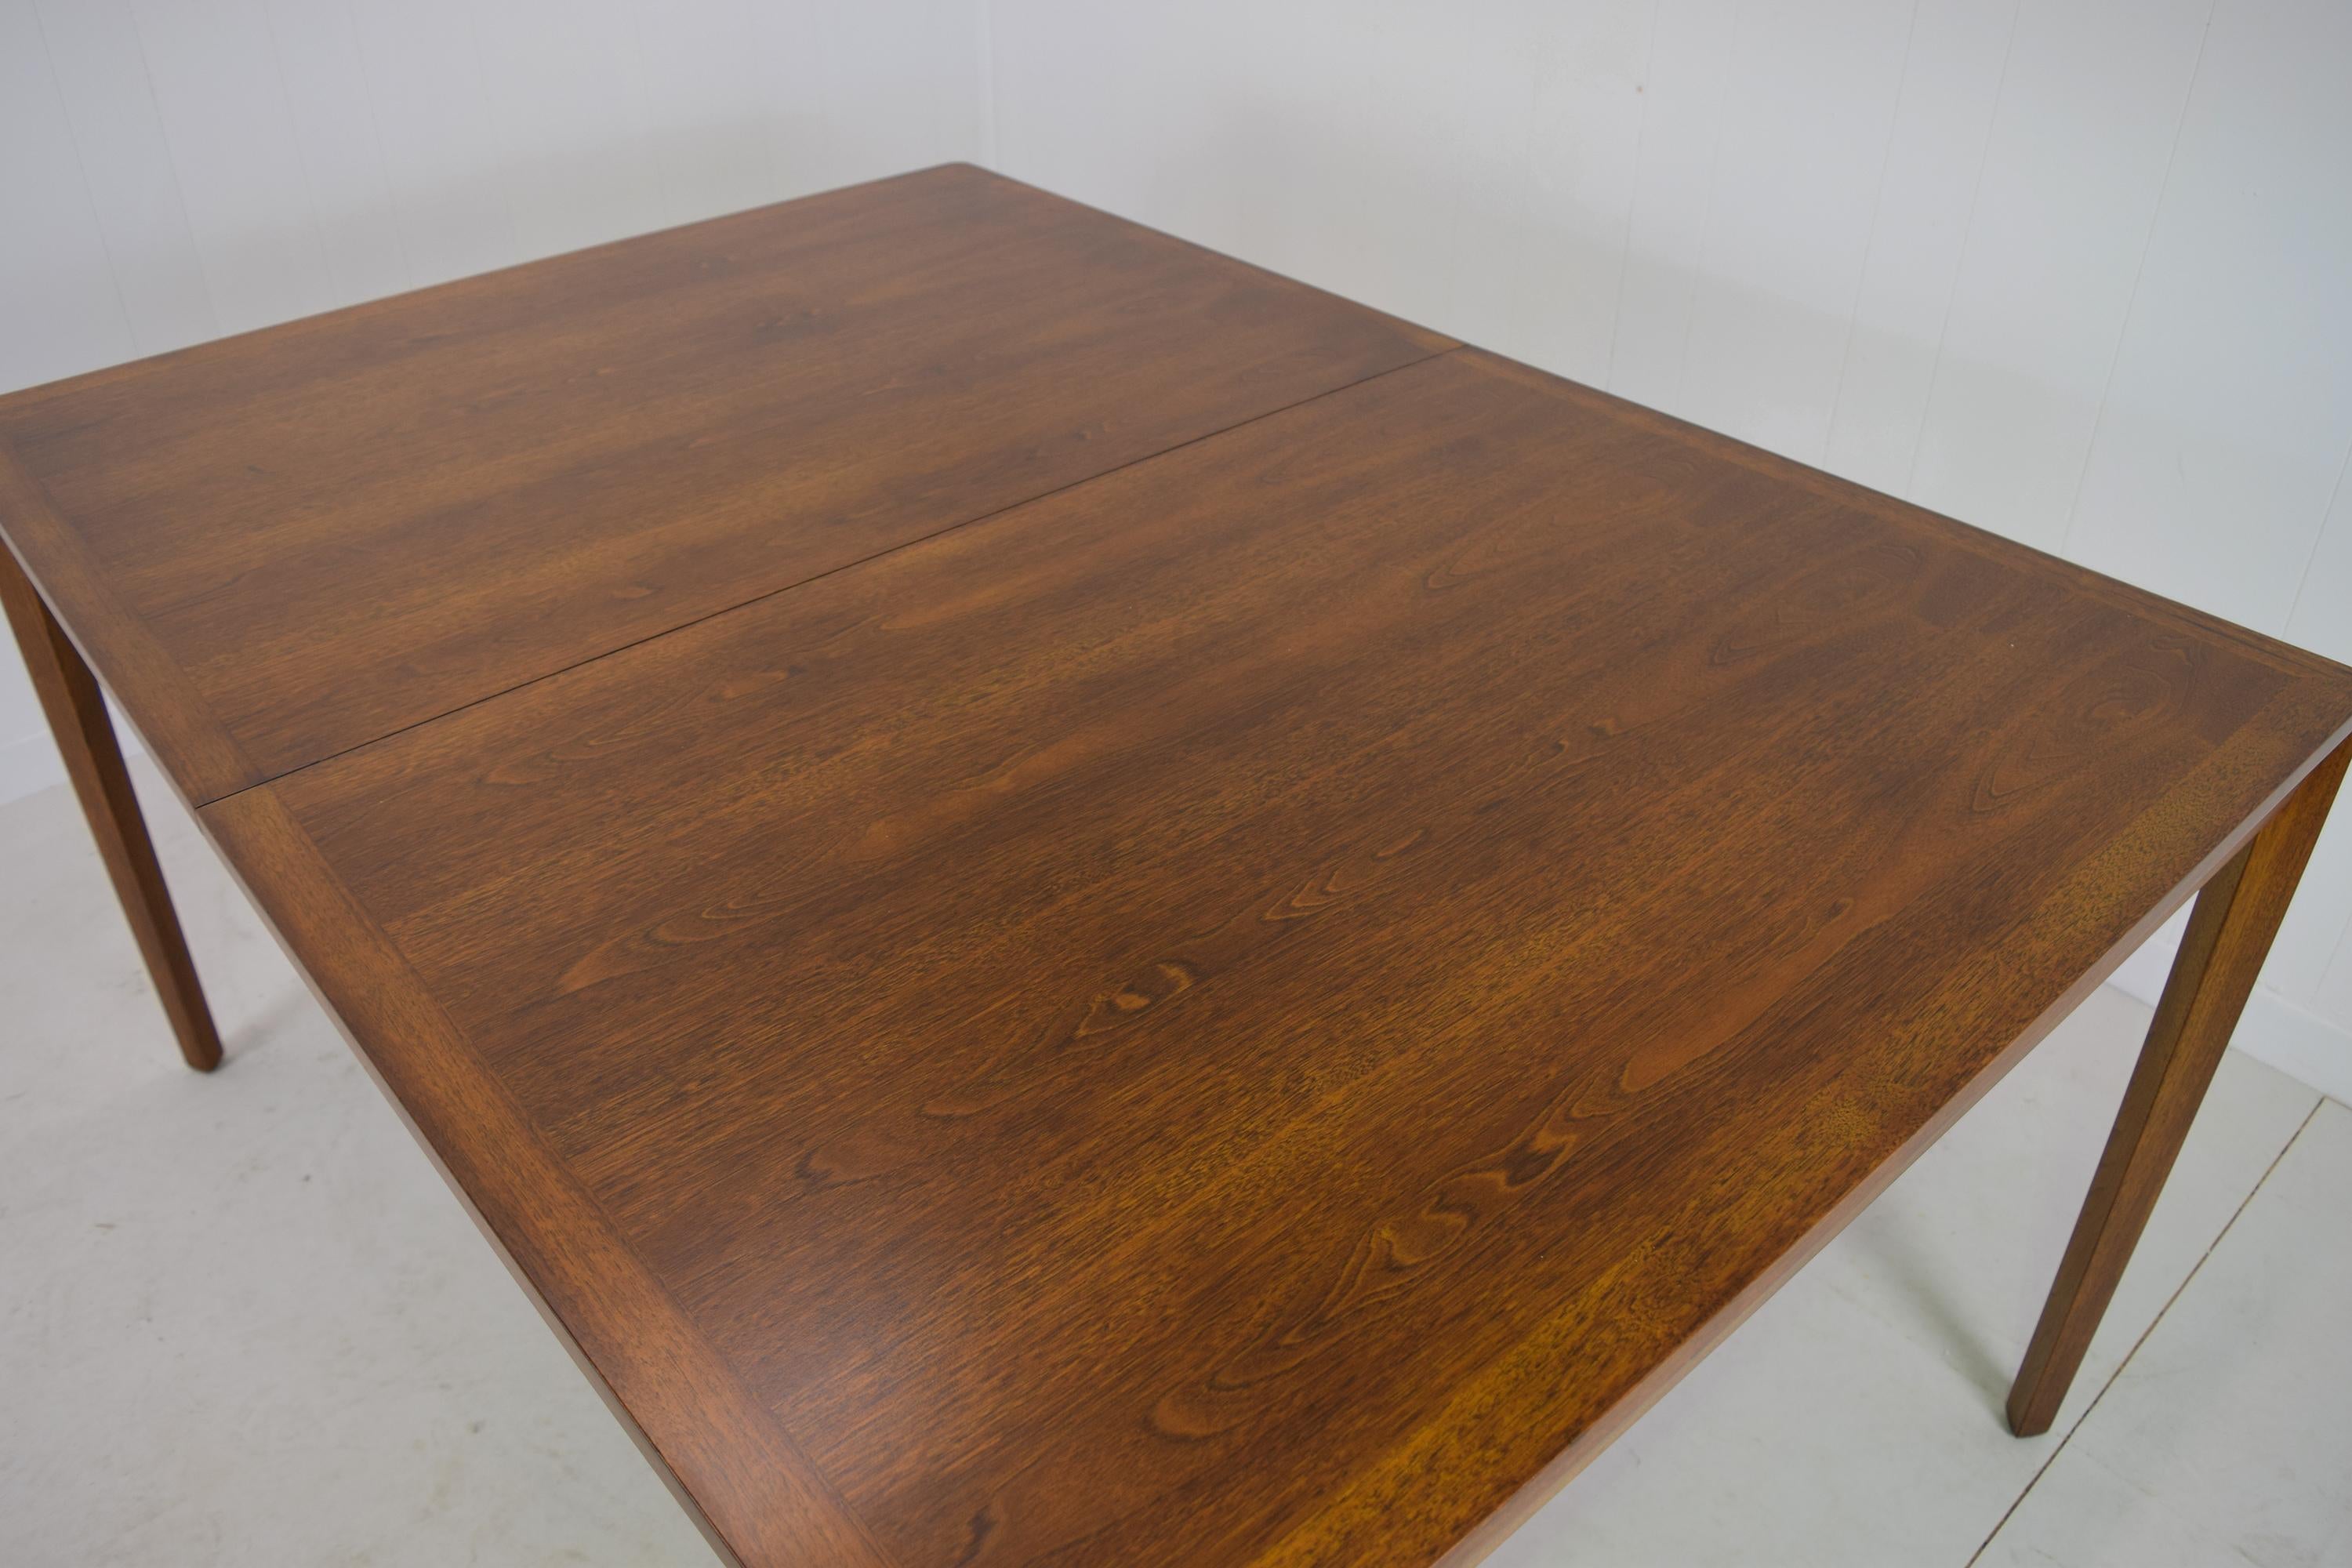 Model 456, Dunbar, USA
circa 1945-1955
All walnut
Refinished entirely with new satin finish
Measures: 42 deep and 28.25 tall, either 60 standard, 80 or 100 inches long with leafs.

This model is less common from Dunbar and comes standard with